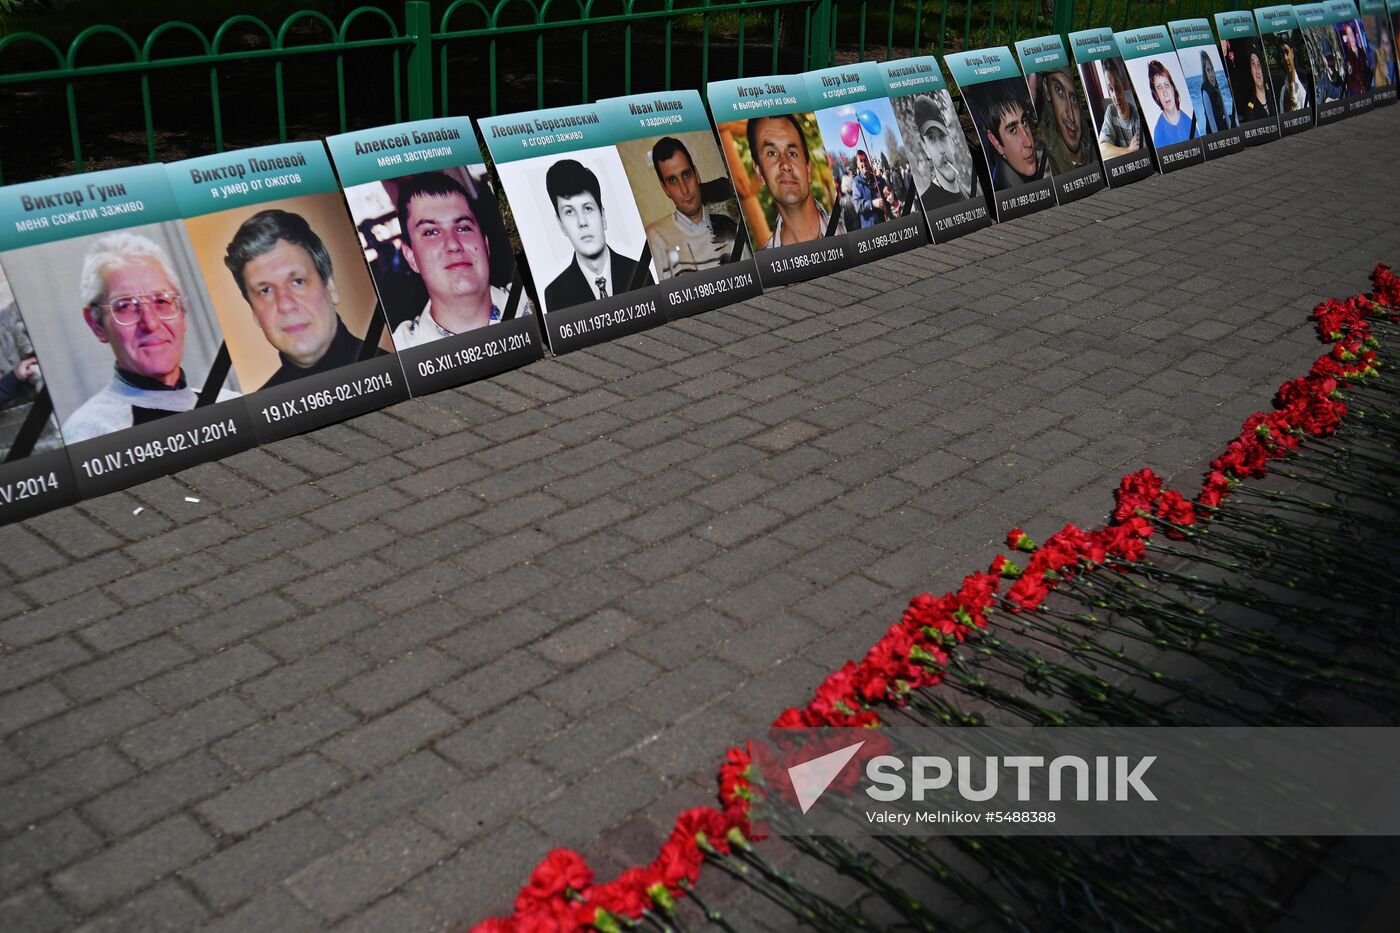 Moscow holds rally for those killed on May 2, 2014 in Odessa